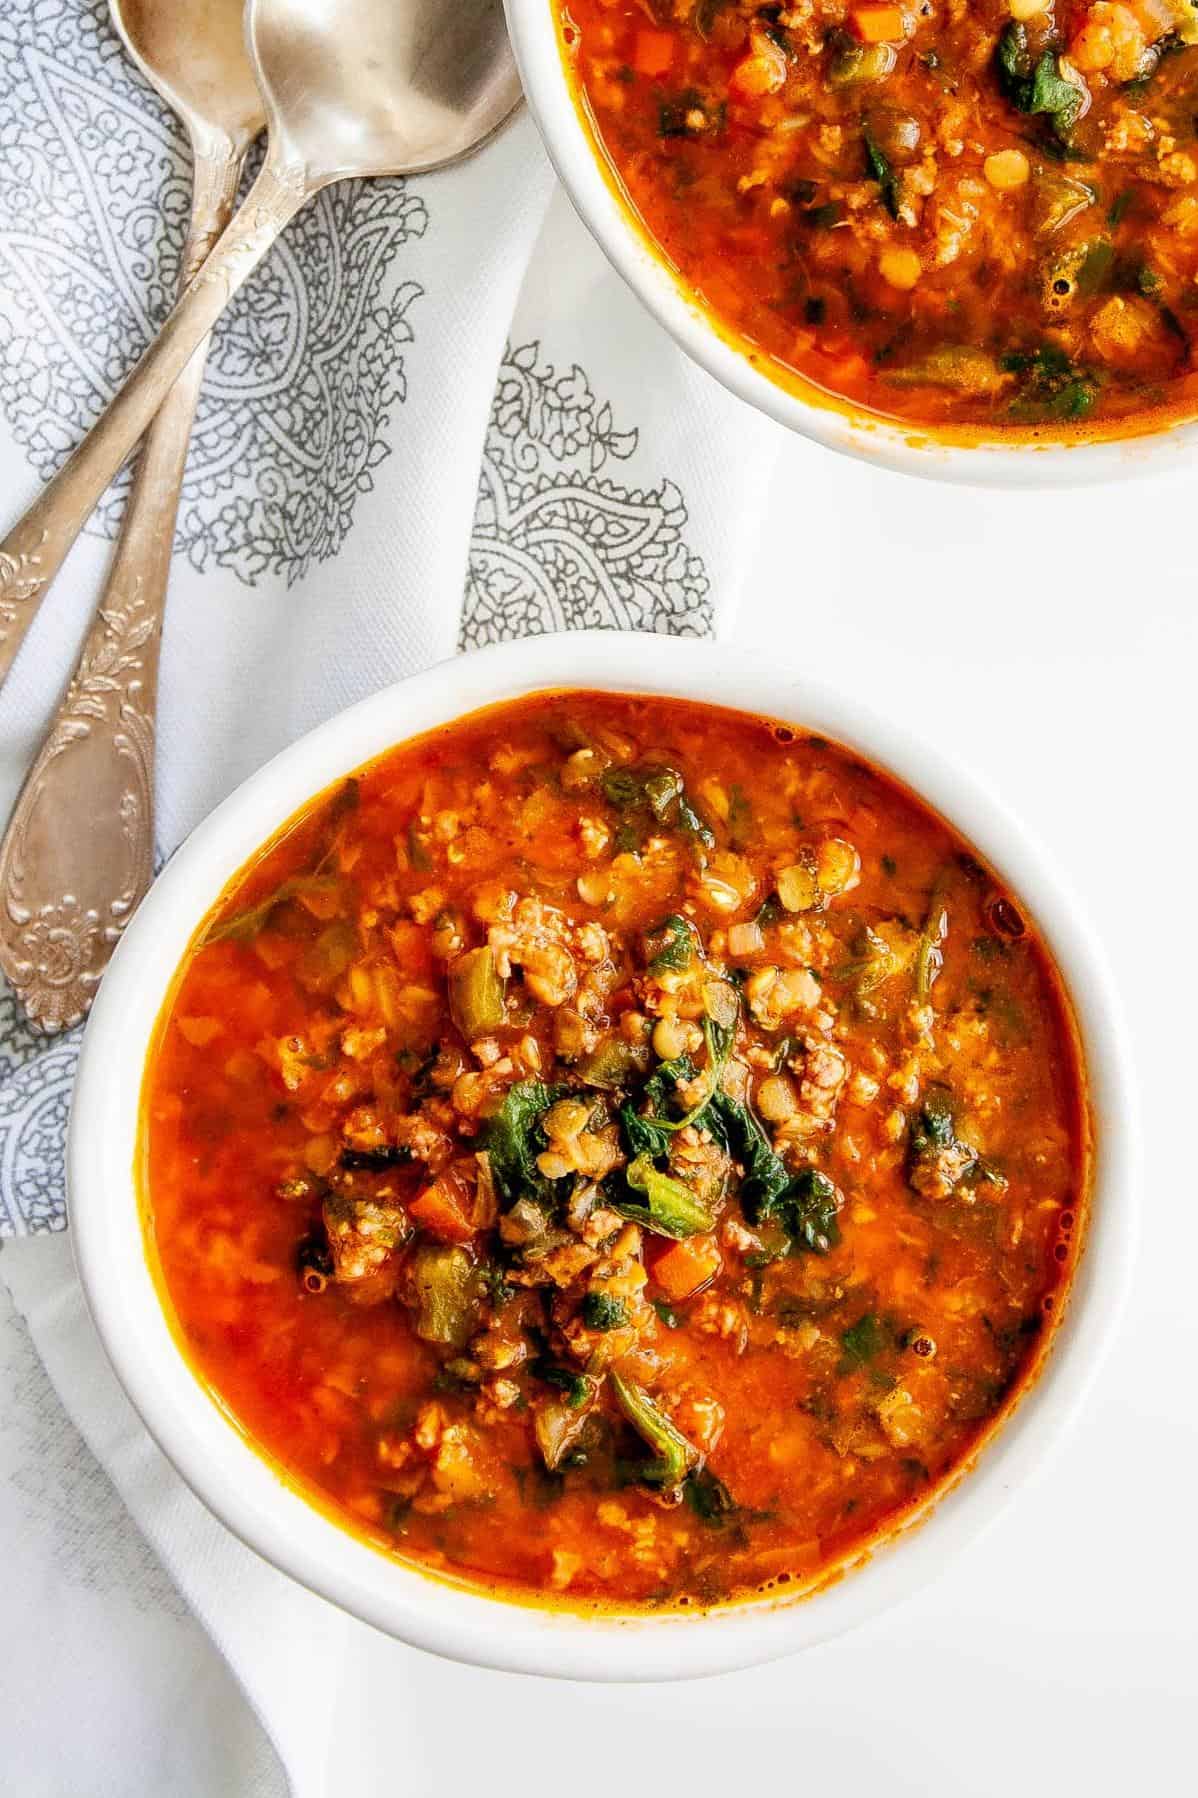  This soup is packed with protein and fiber, making it a great option for anyone watching their diet.